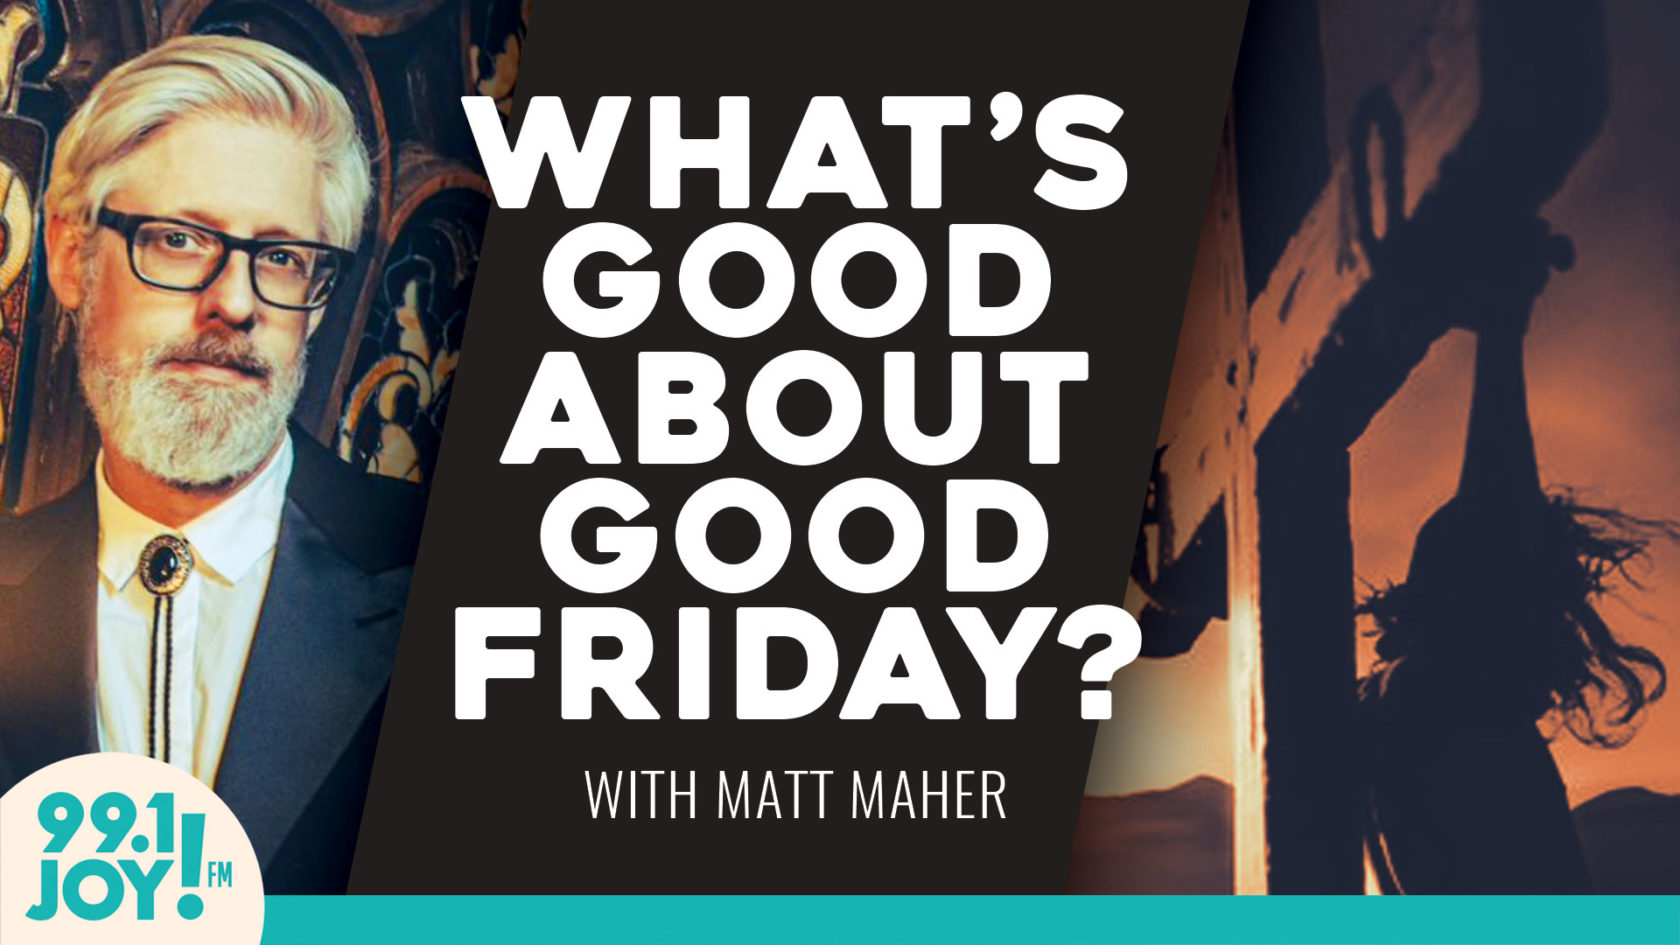 What is so good about Good Friday? A discussion with Matt Maher.